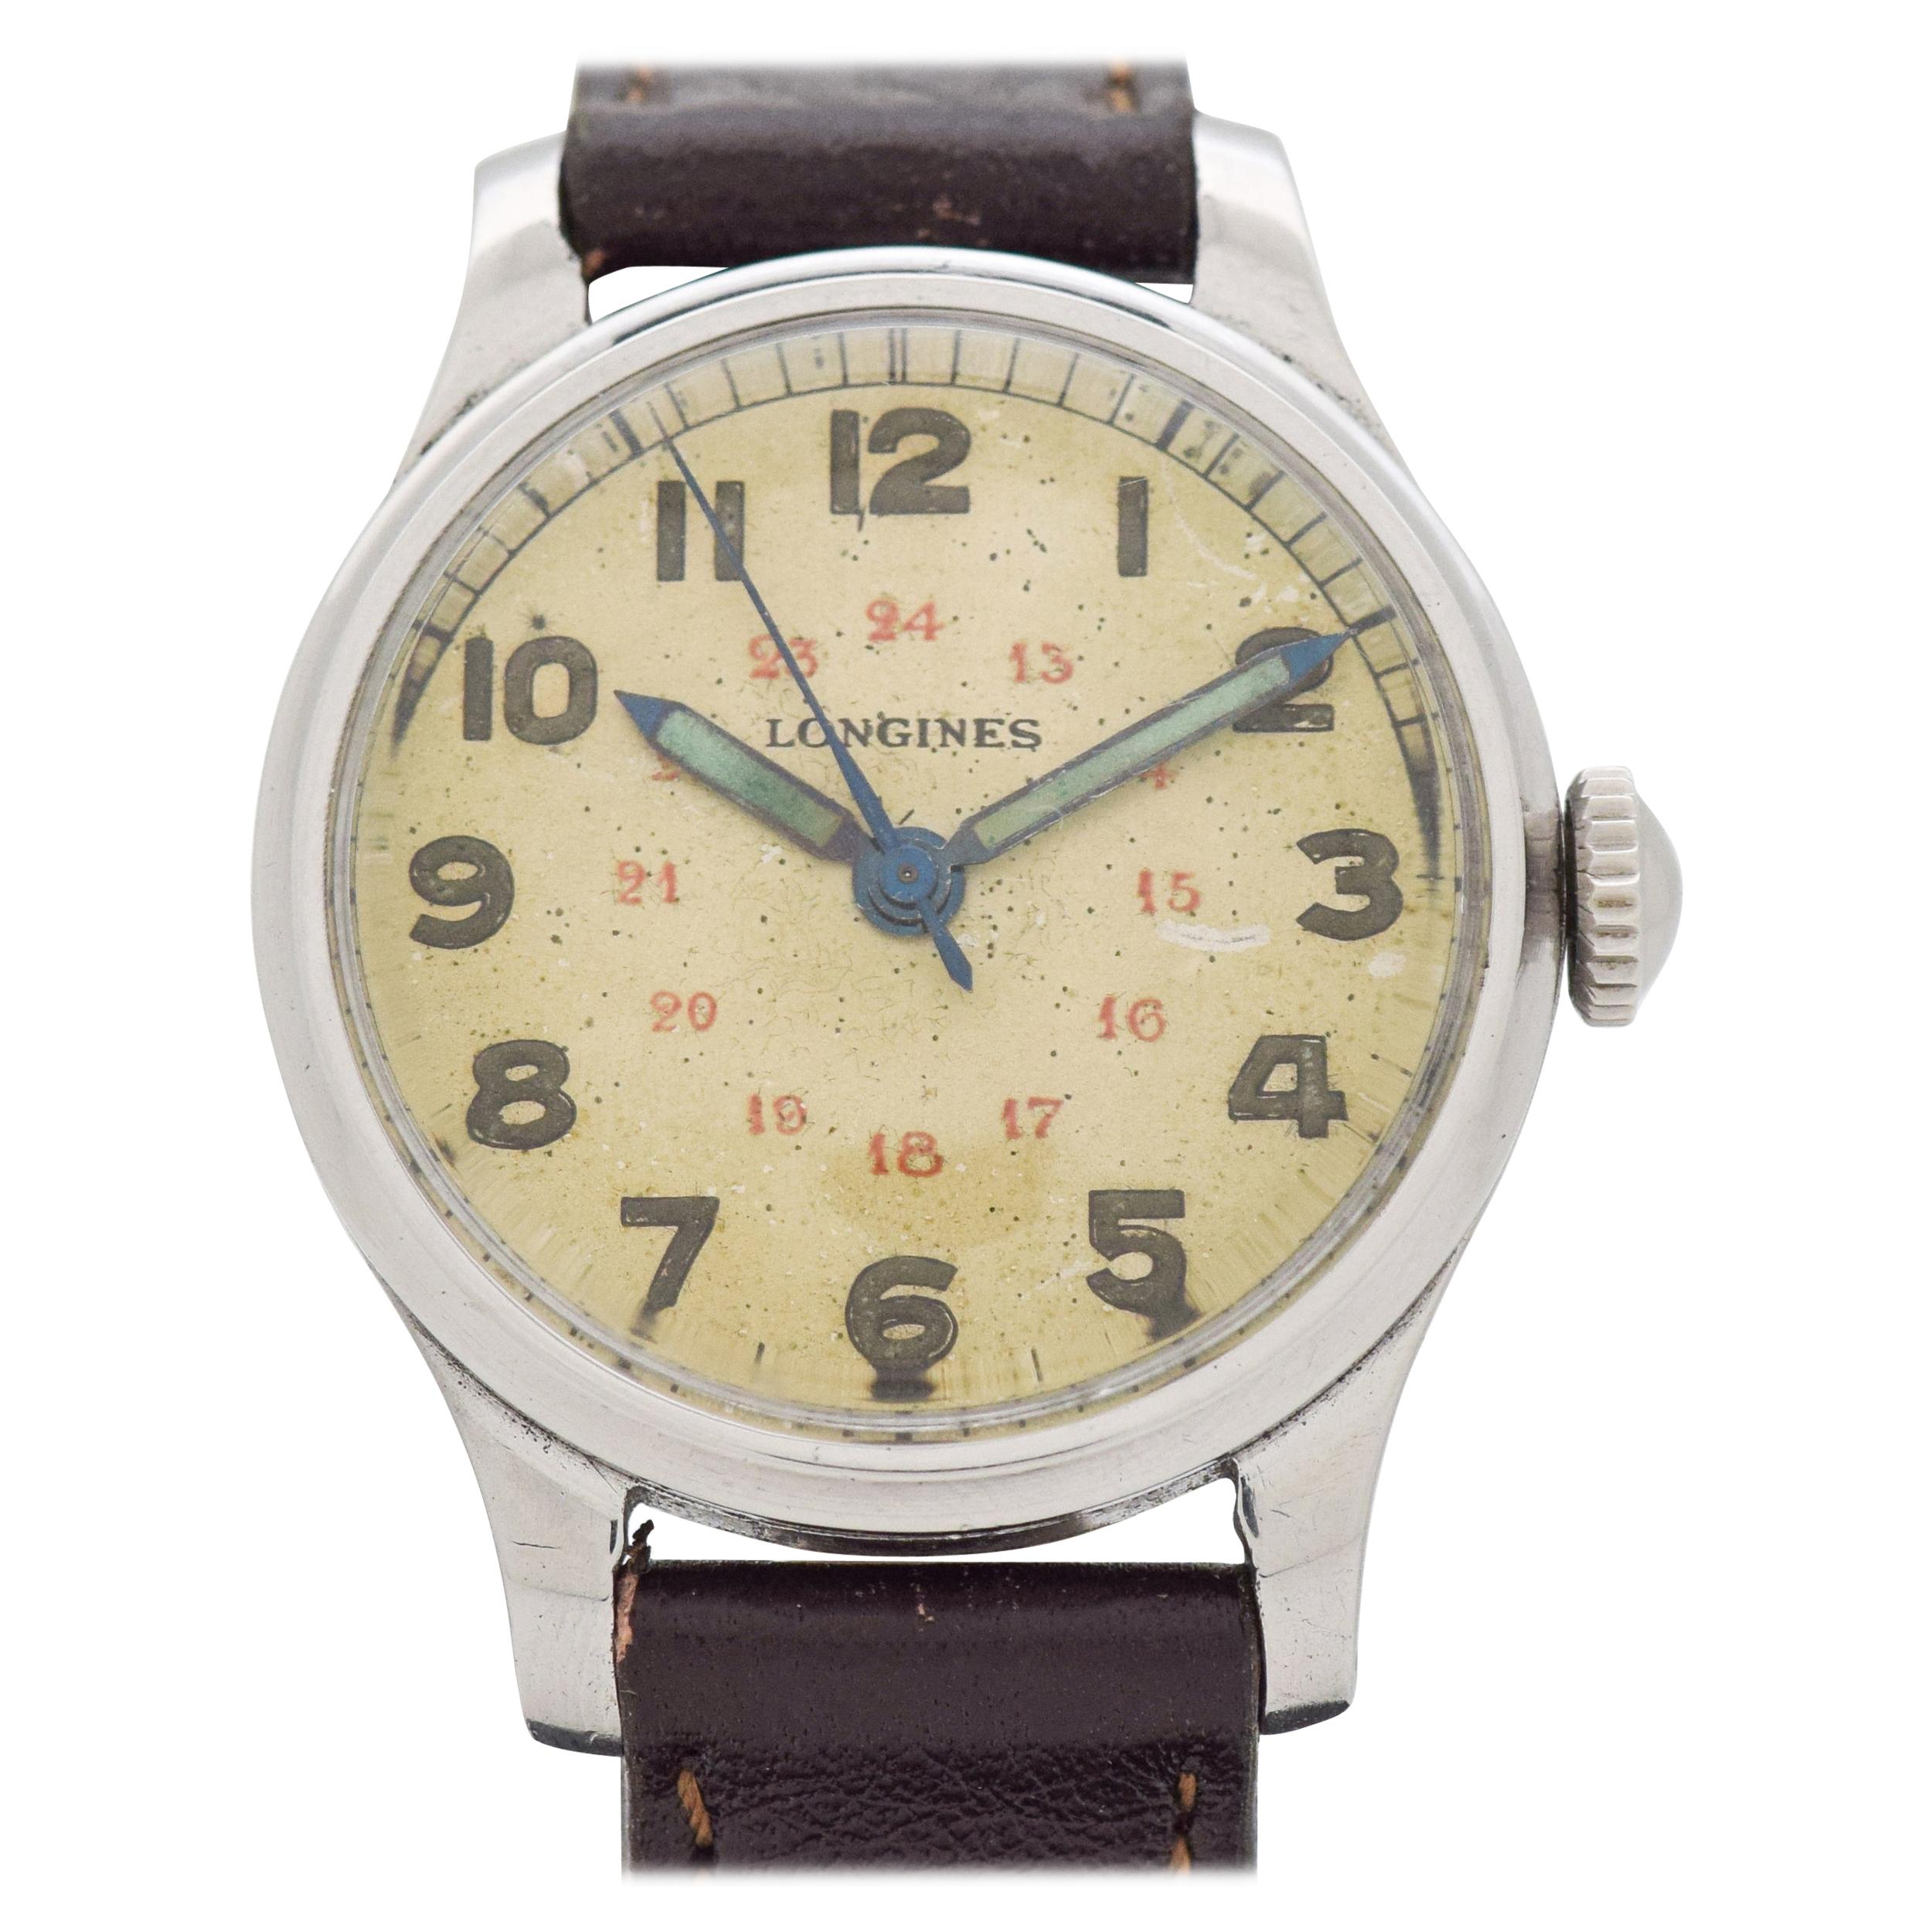 Vintage Longines Military WWII-Era Chrome and Stainless Steel Watch, 1944